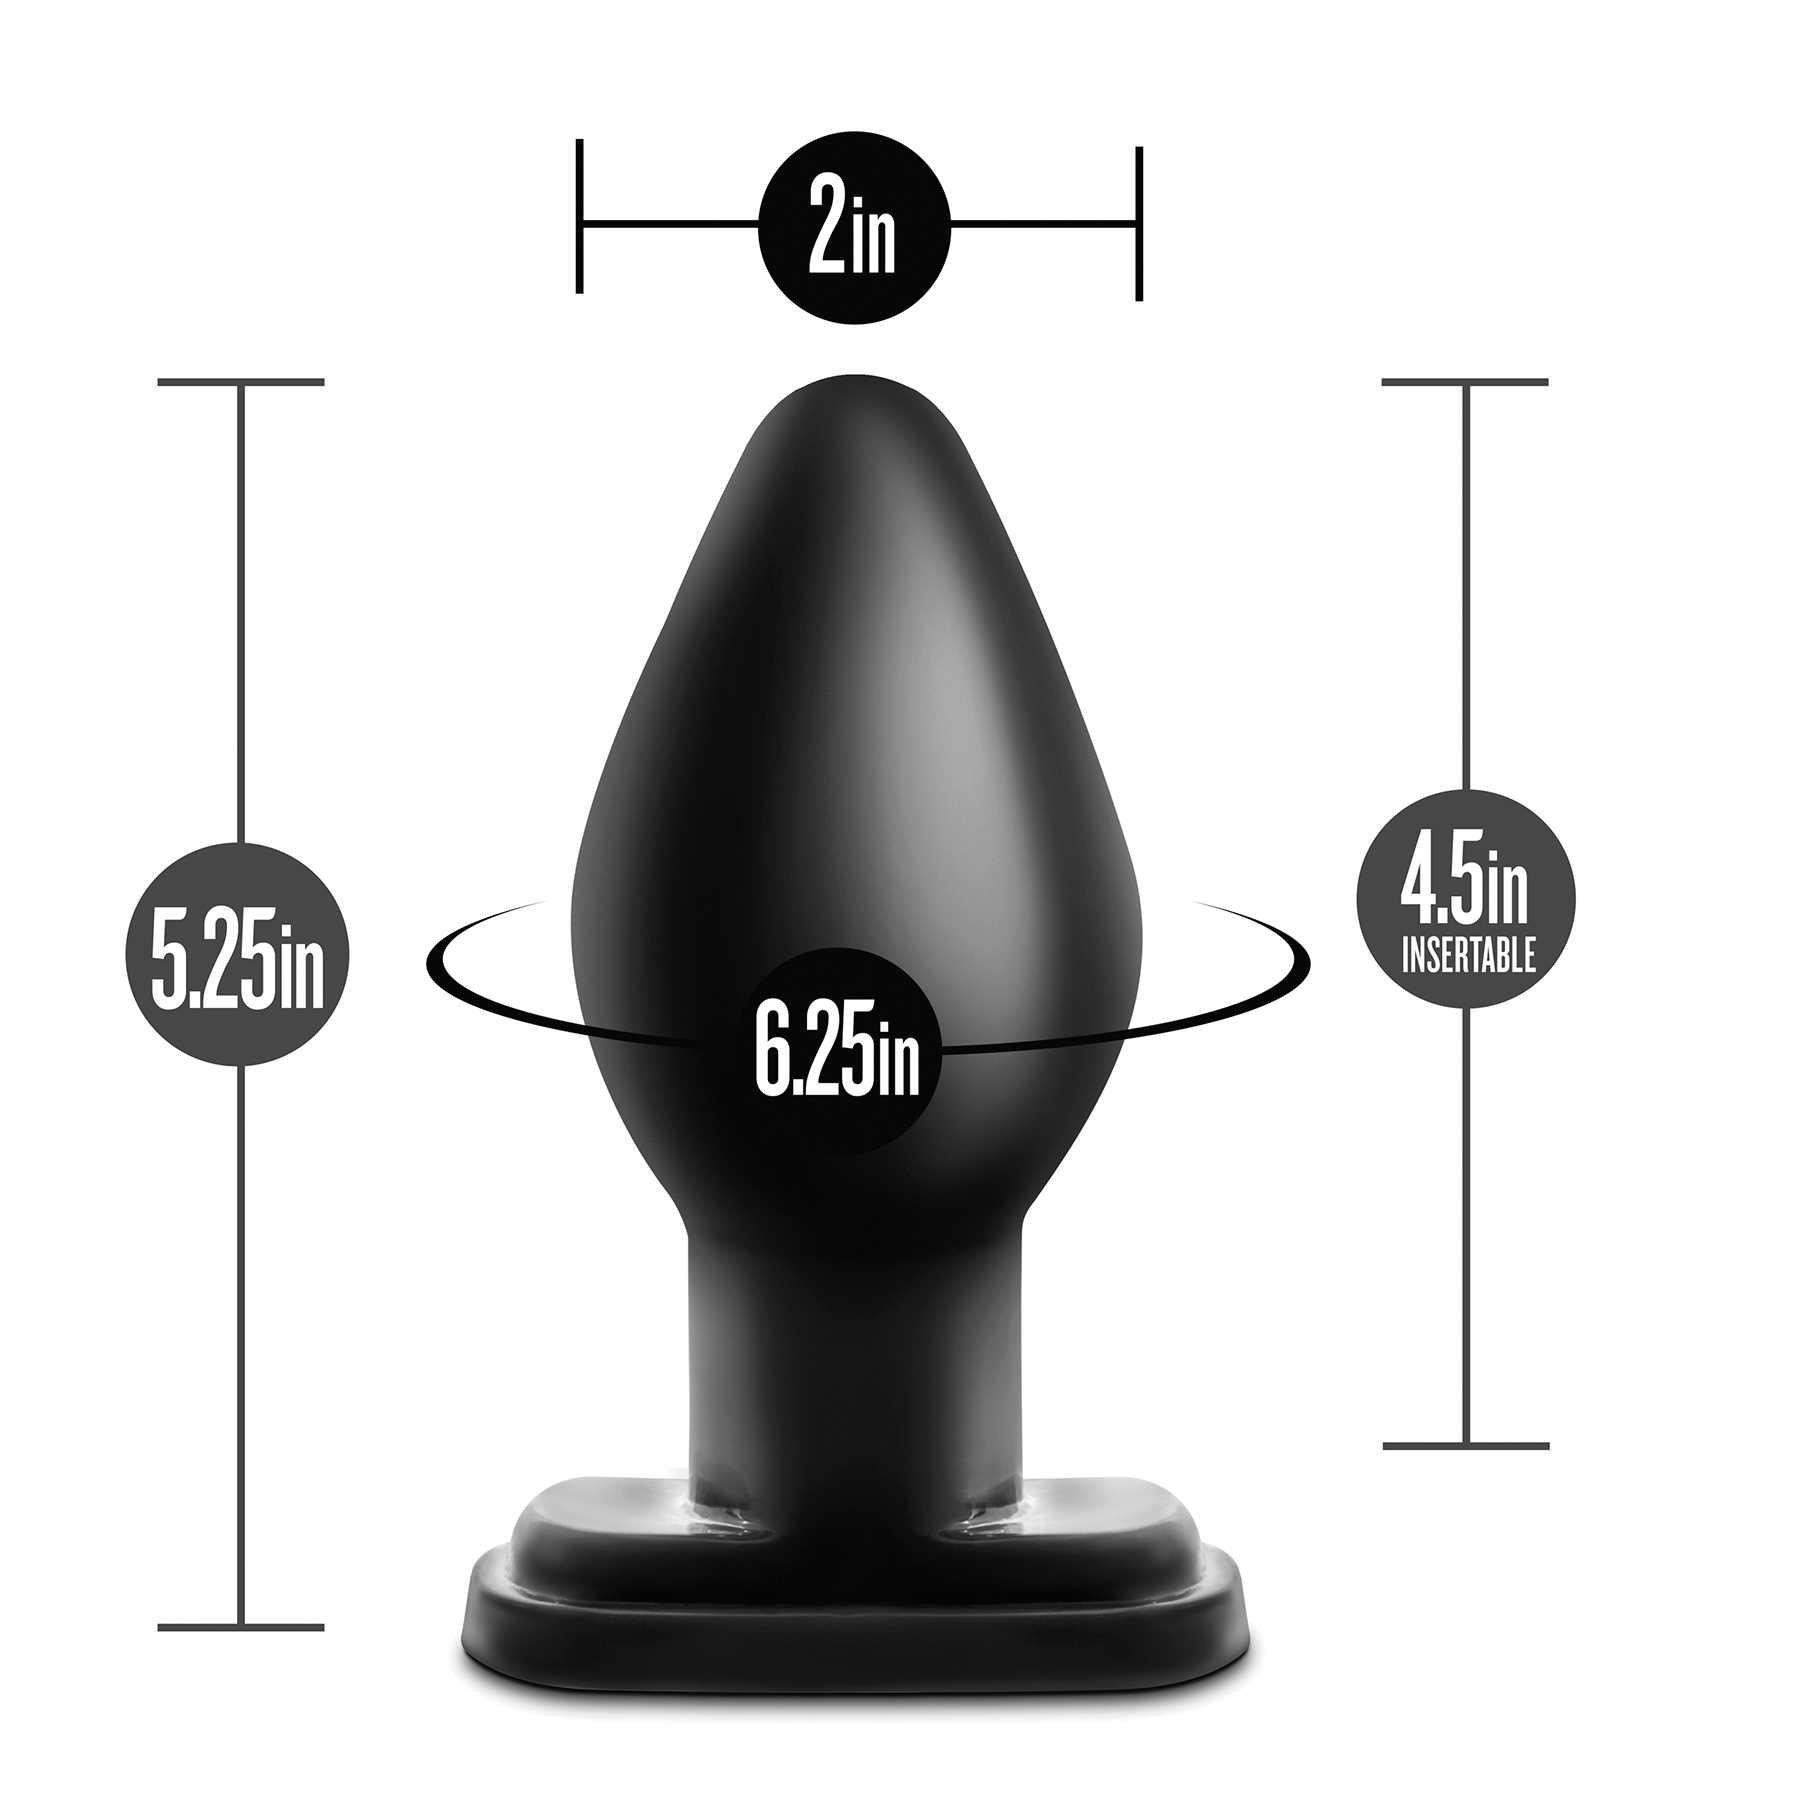 Anal Adventures XL Plug with measurements